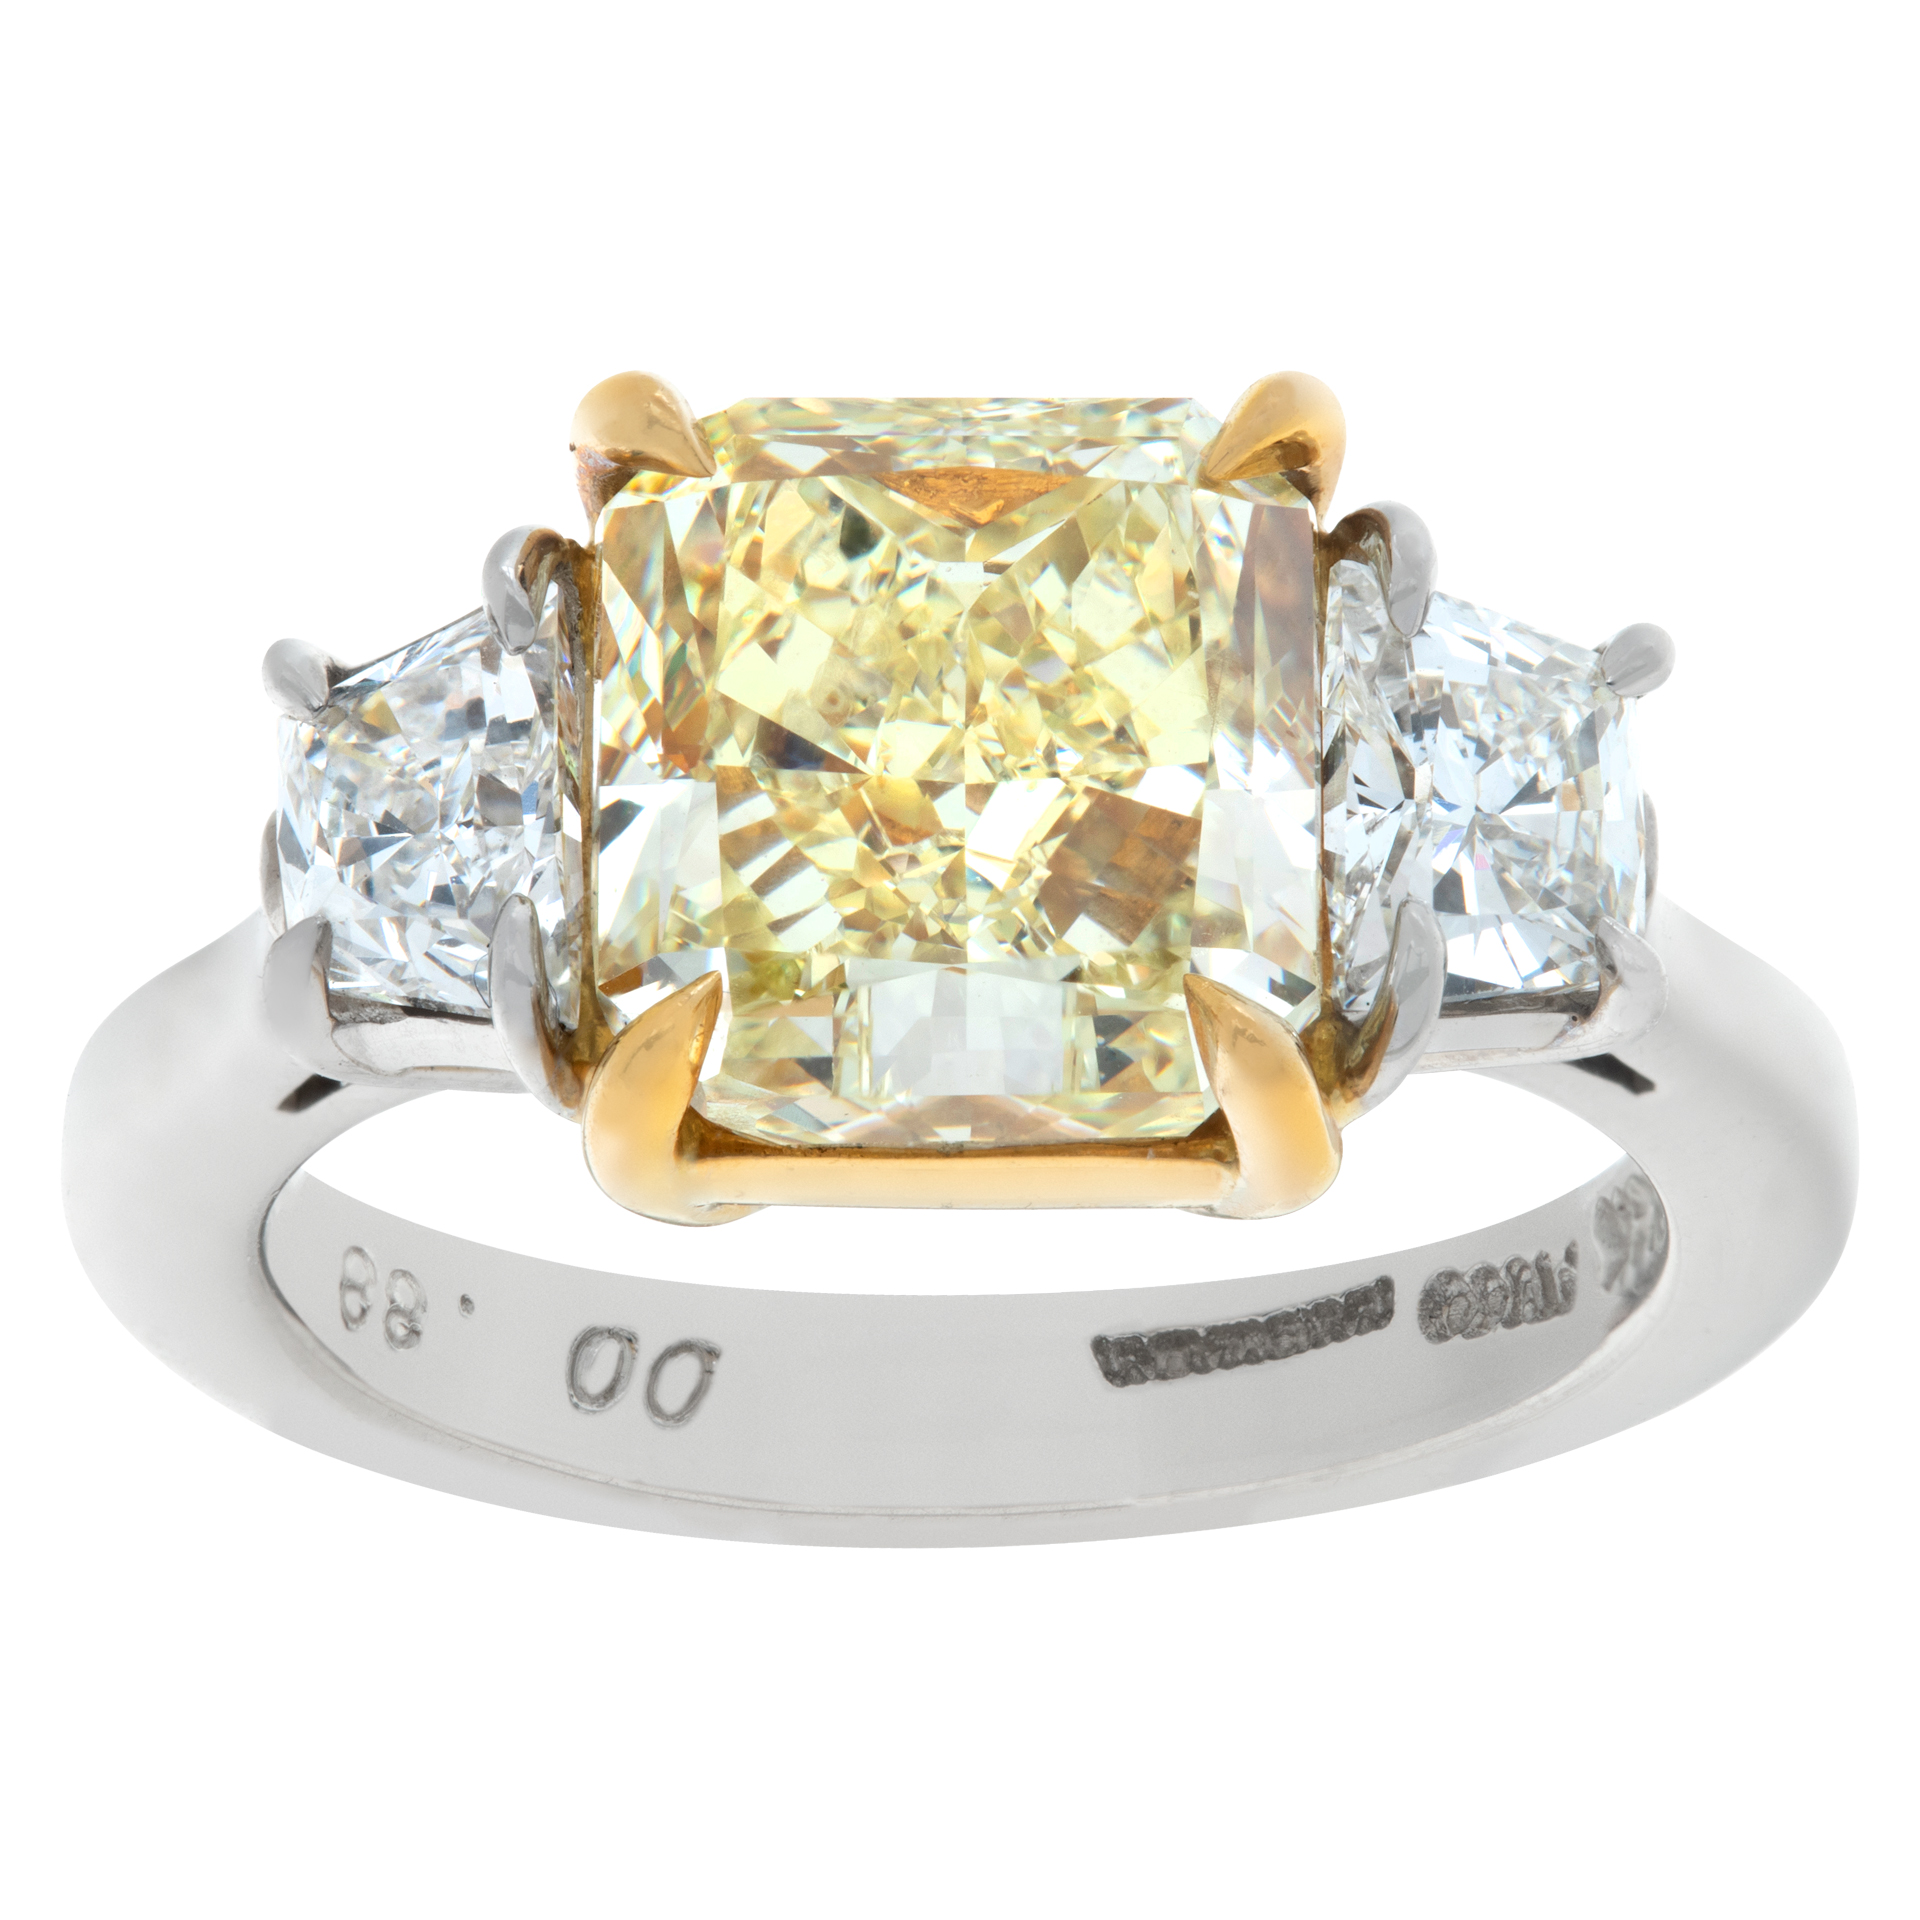 GIA certified 4.00 carat natural fancy yellow even, Cut Cornered Square Modified Brilliant Diamond, VS2 clarity, ring in platinum and 18Kt yellow gold